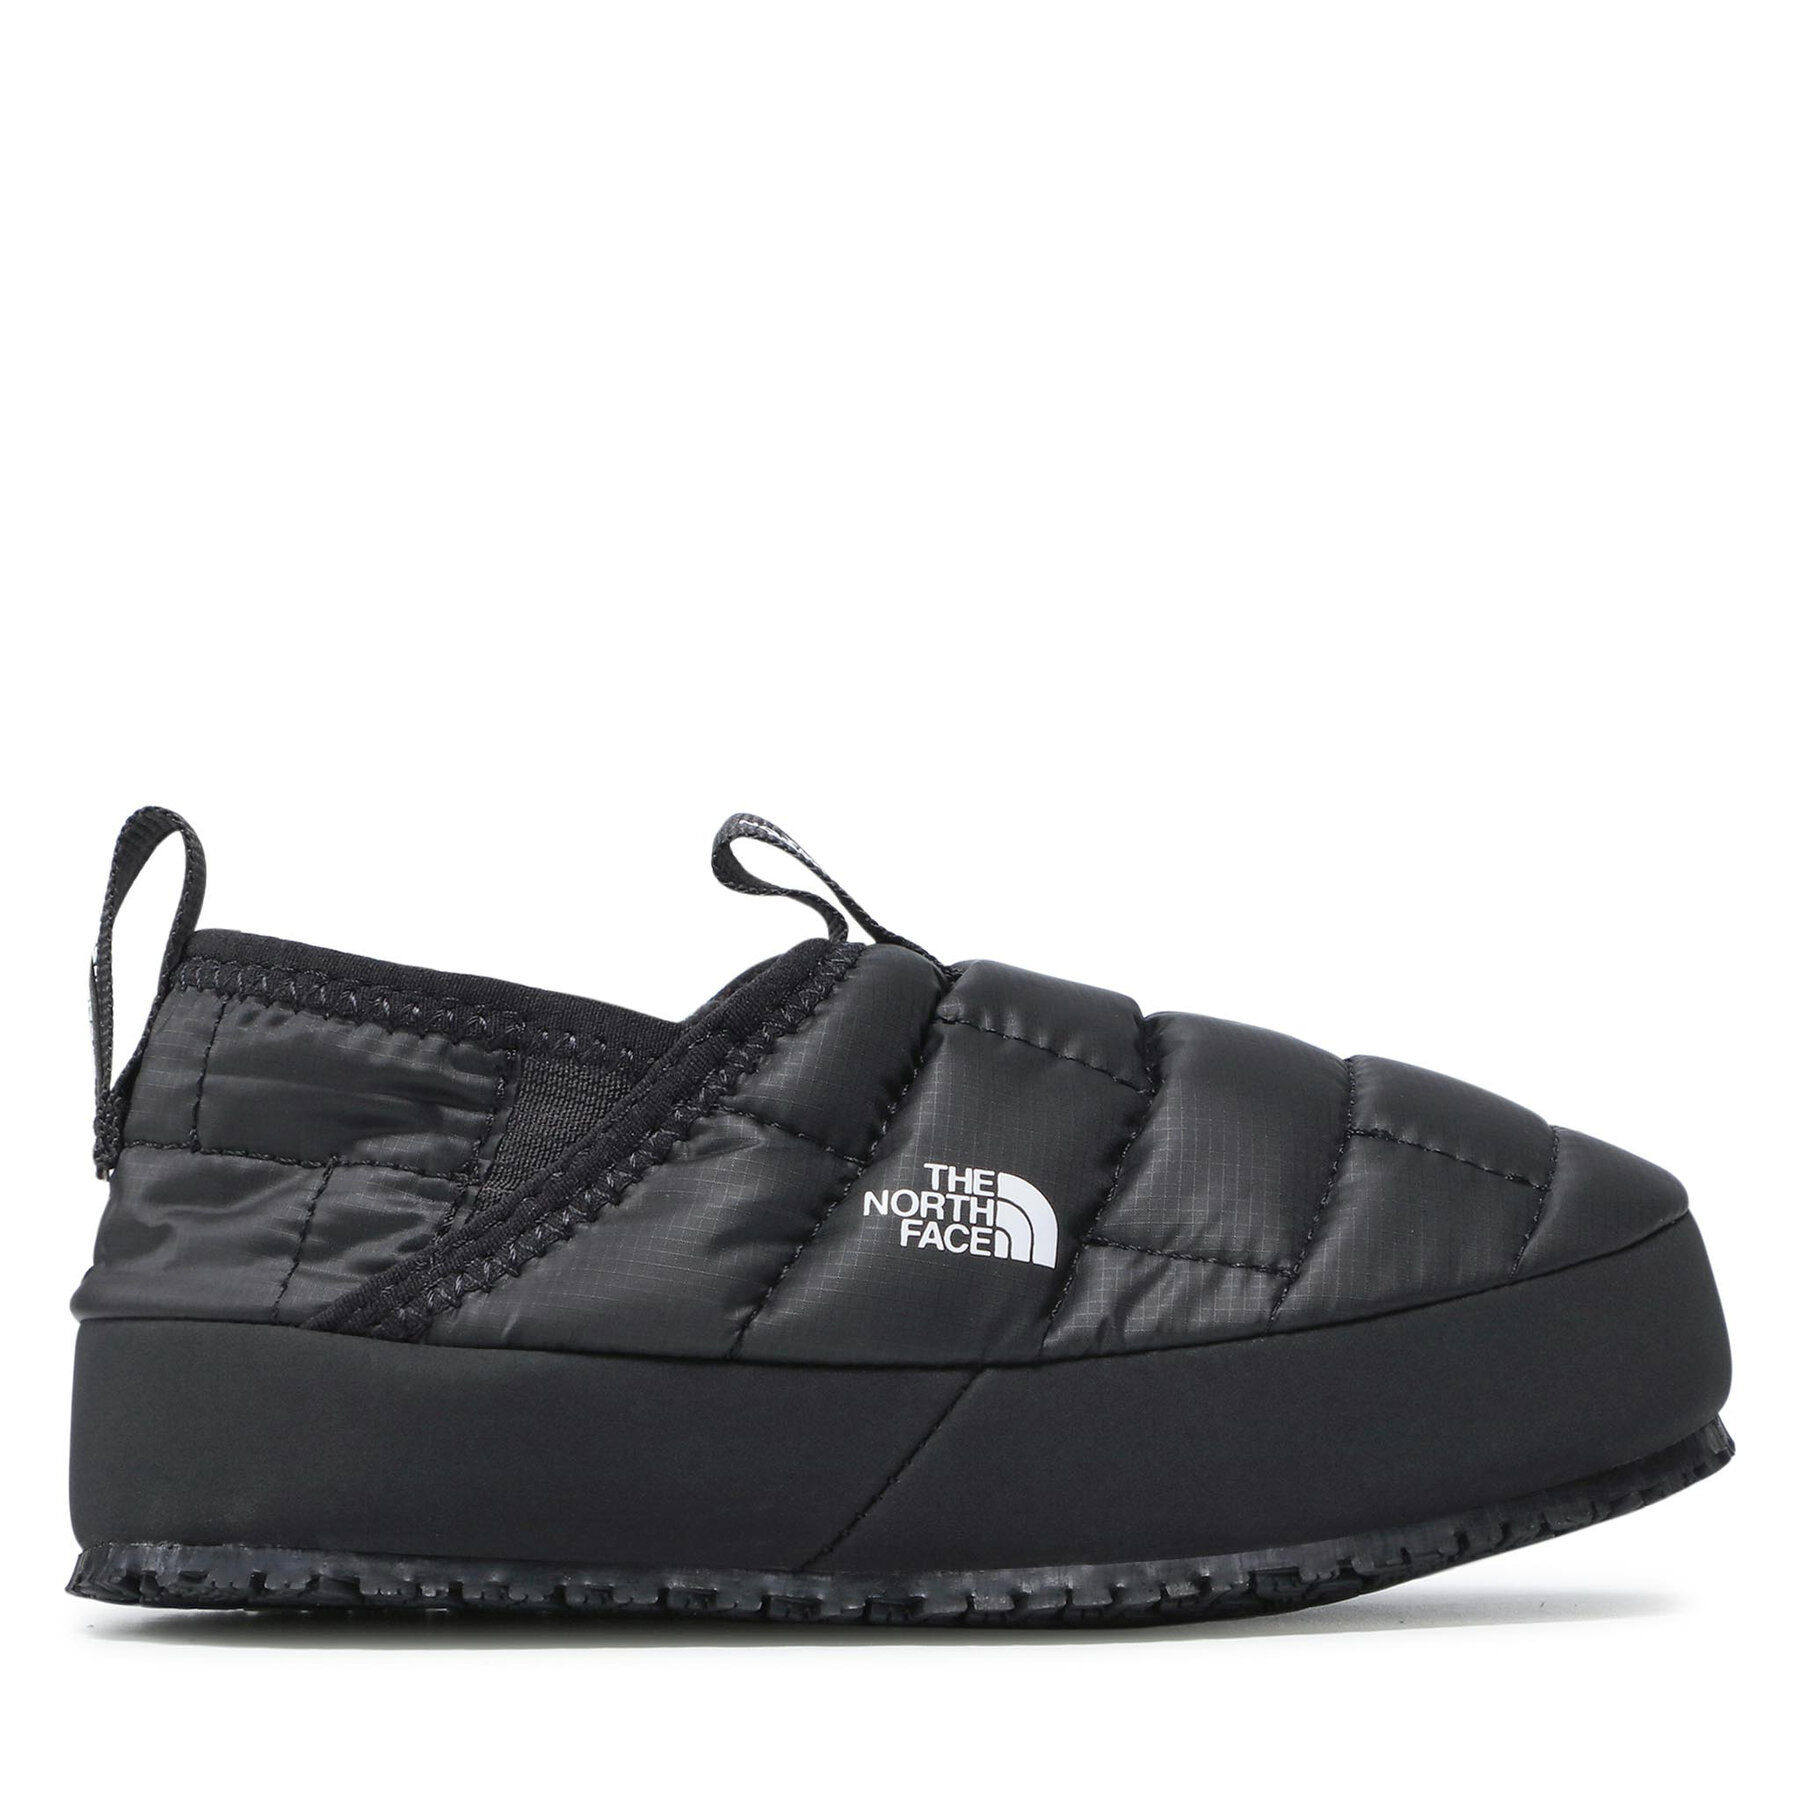 Hausschuhe The North Face Youth Thermoball Traction Mule II NF0A39UXKY4 Tnf Black/Tnf White von The North Face